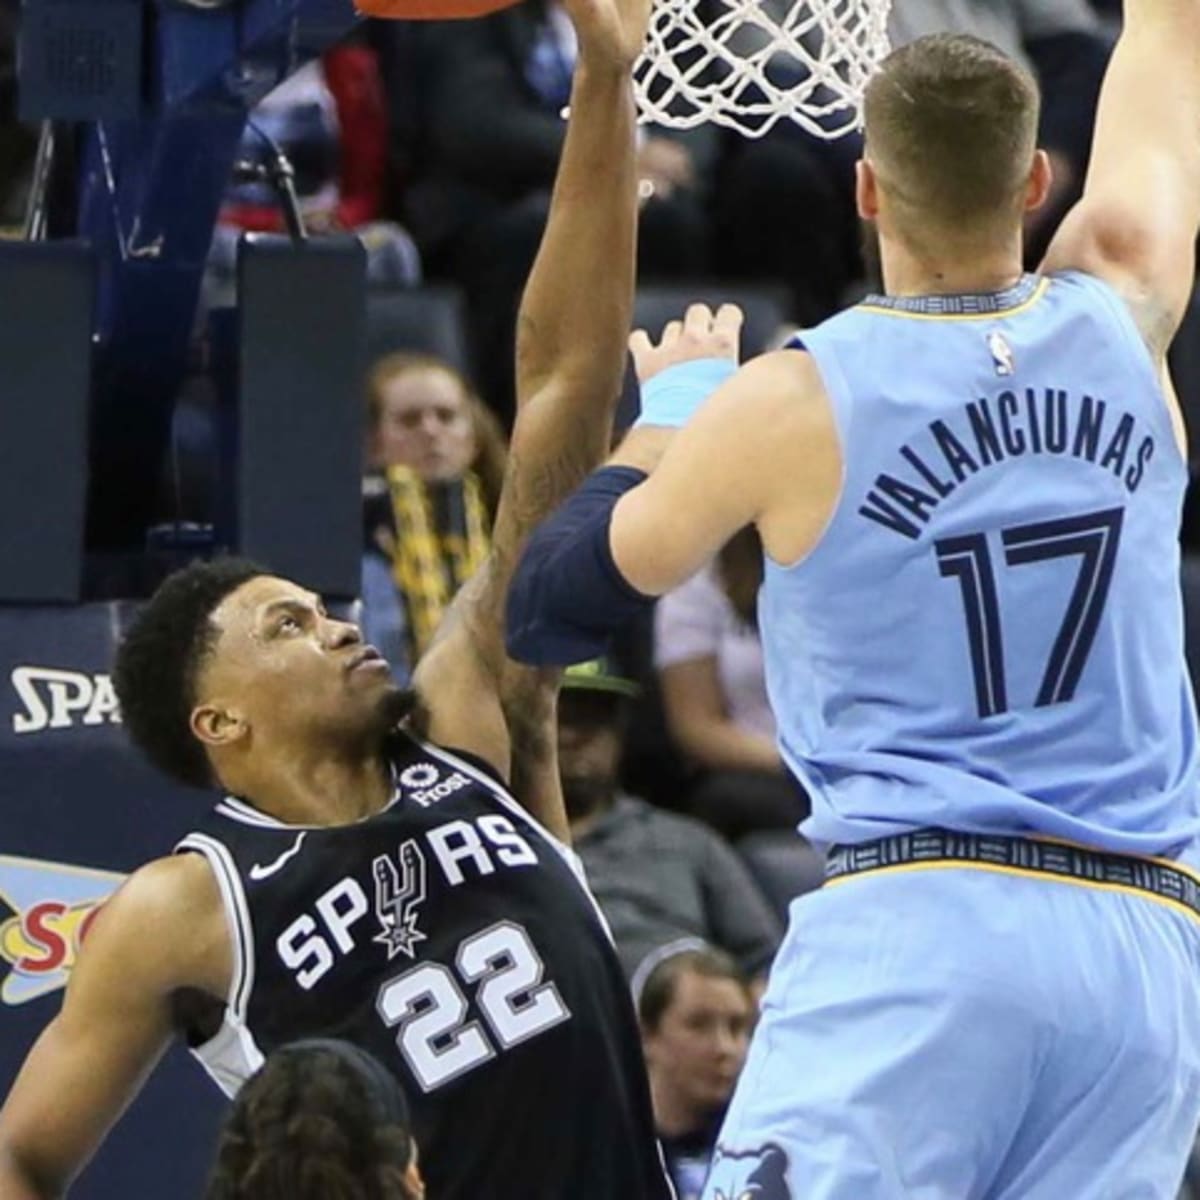 Video Interview Of Former Memphis Grizzlies Rudy Gay - Sports Illustrated  Memphis Grizzles News, Analysis and More